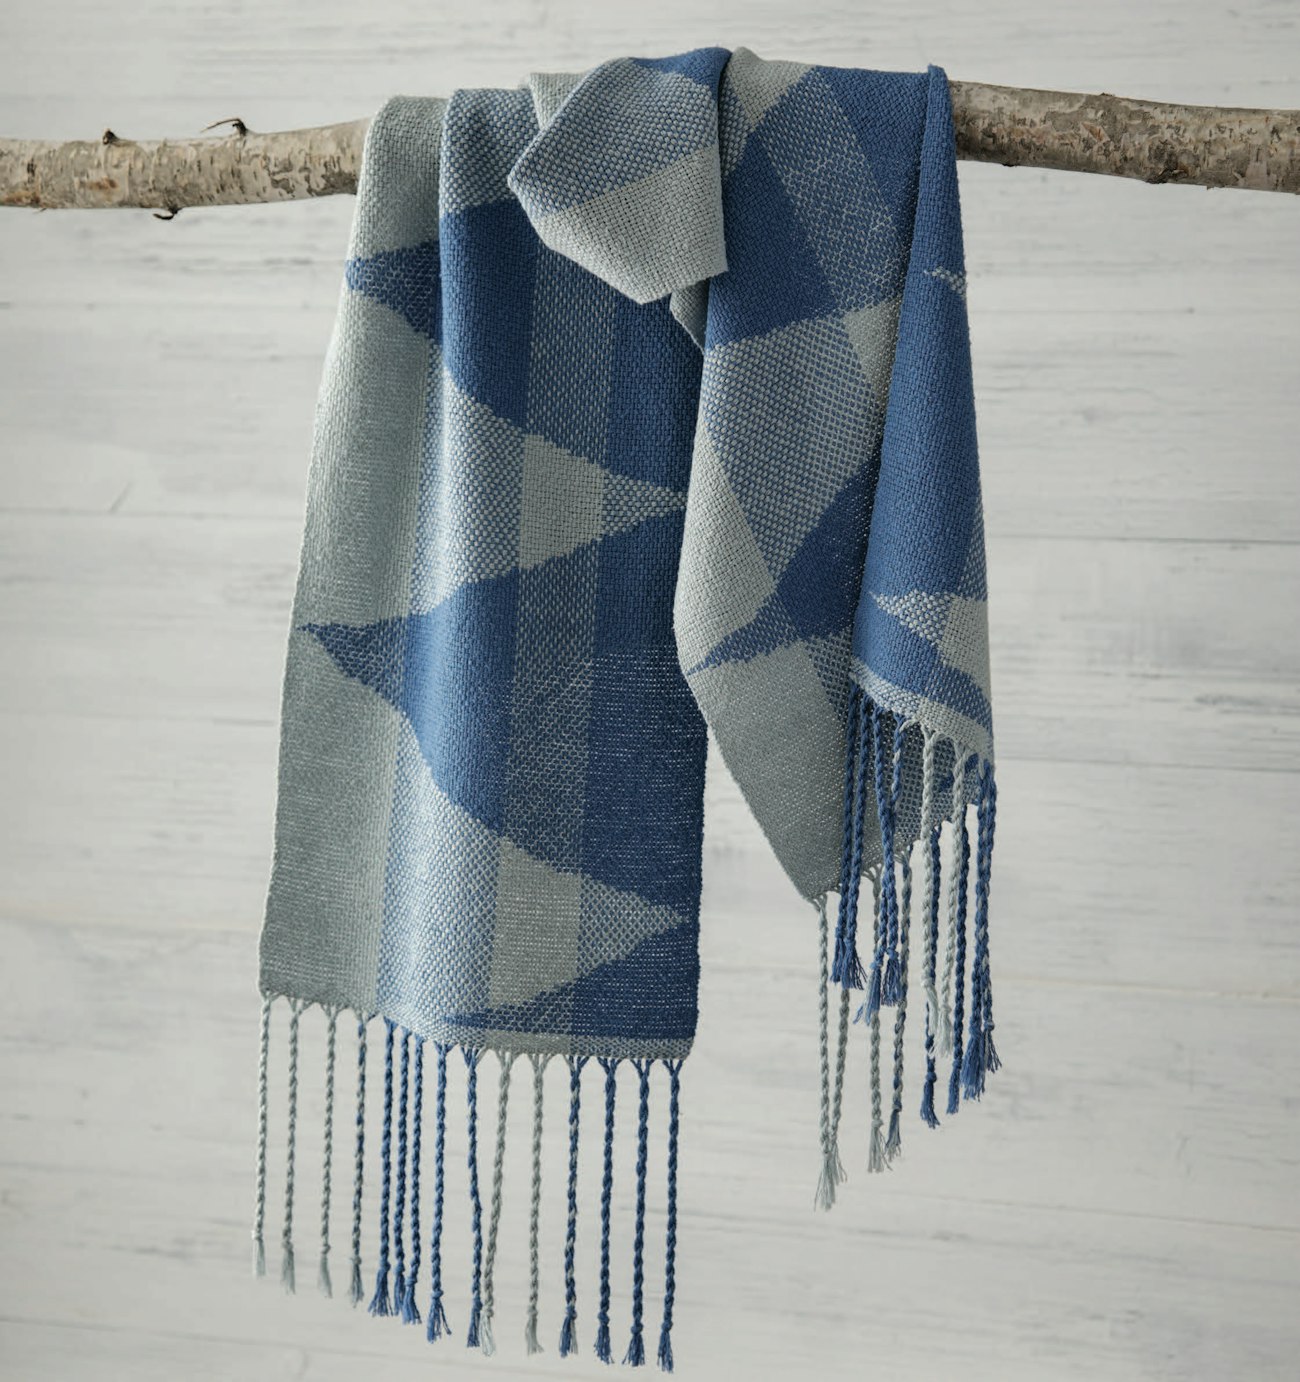 Snowy Mountains Scarf by Angela Tong